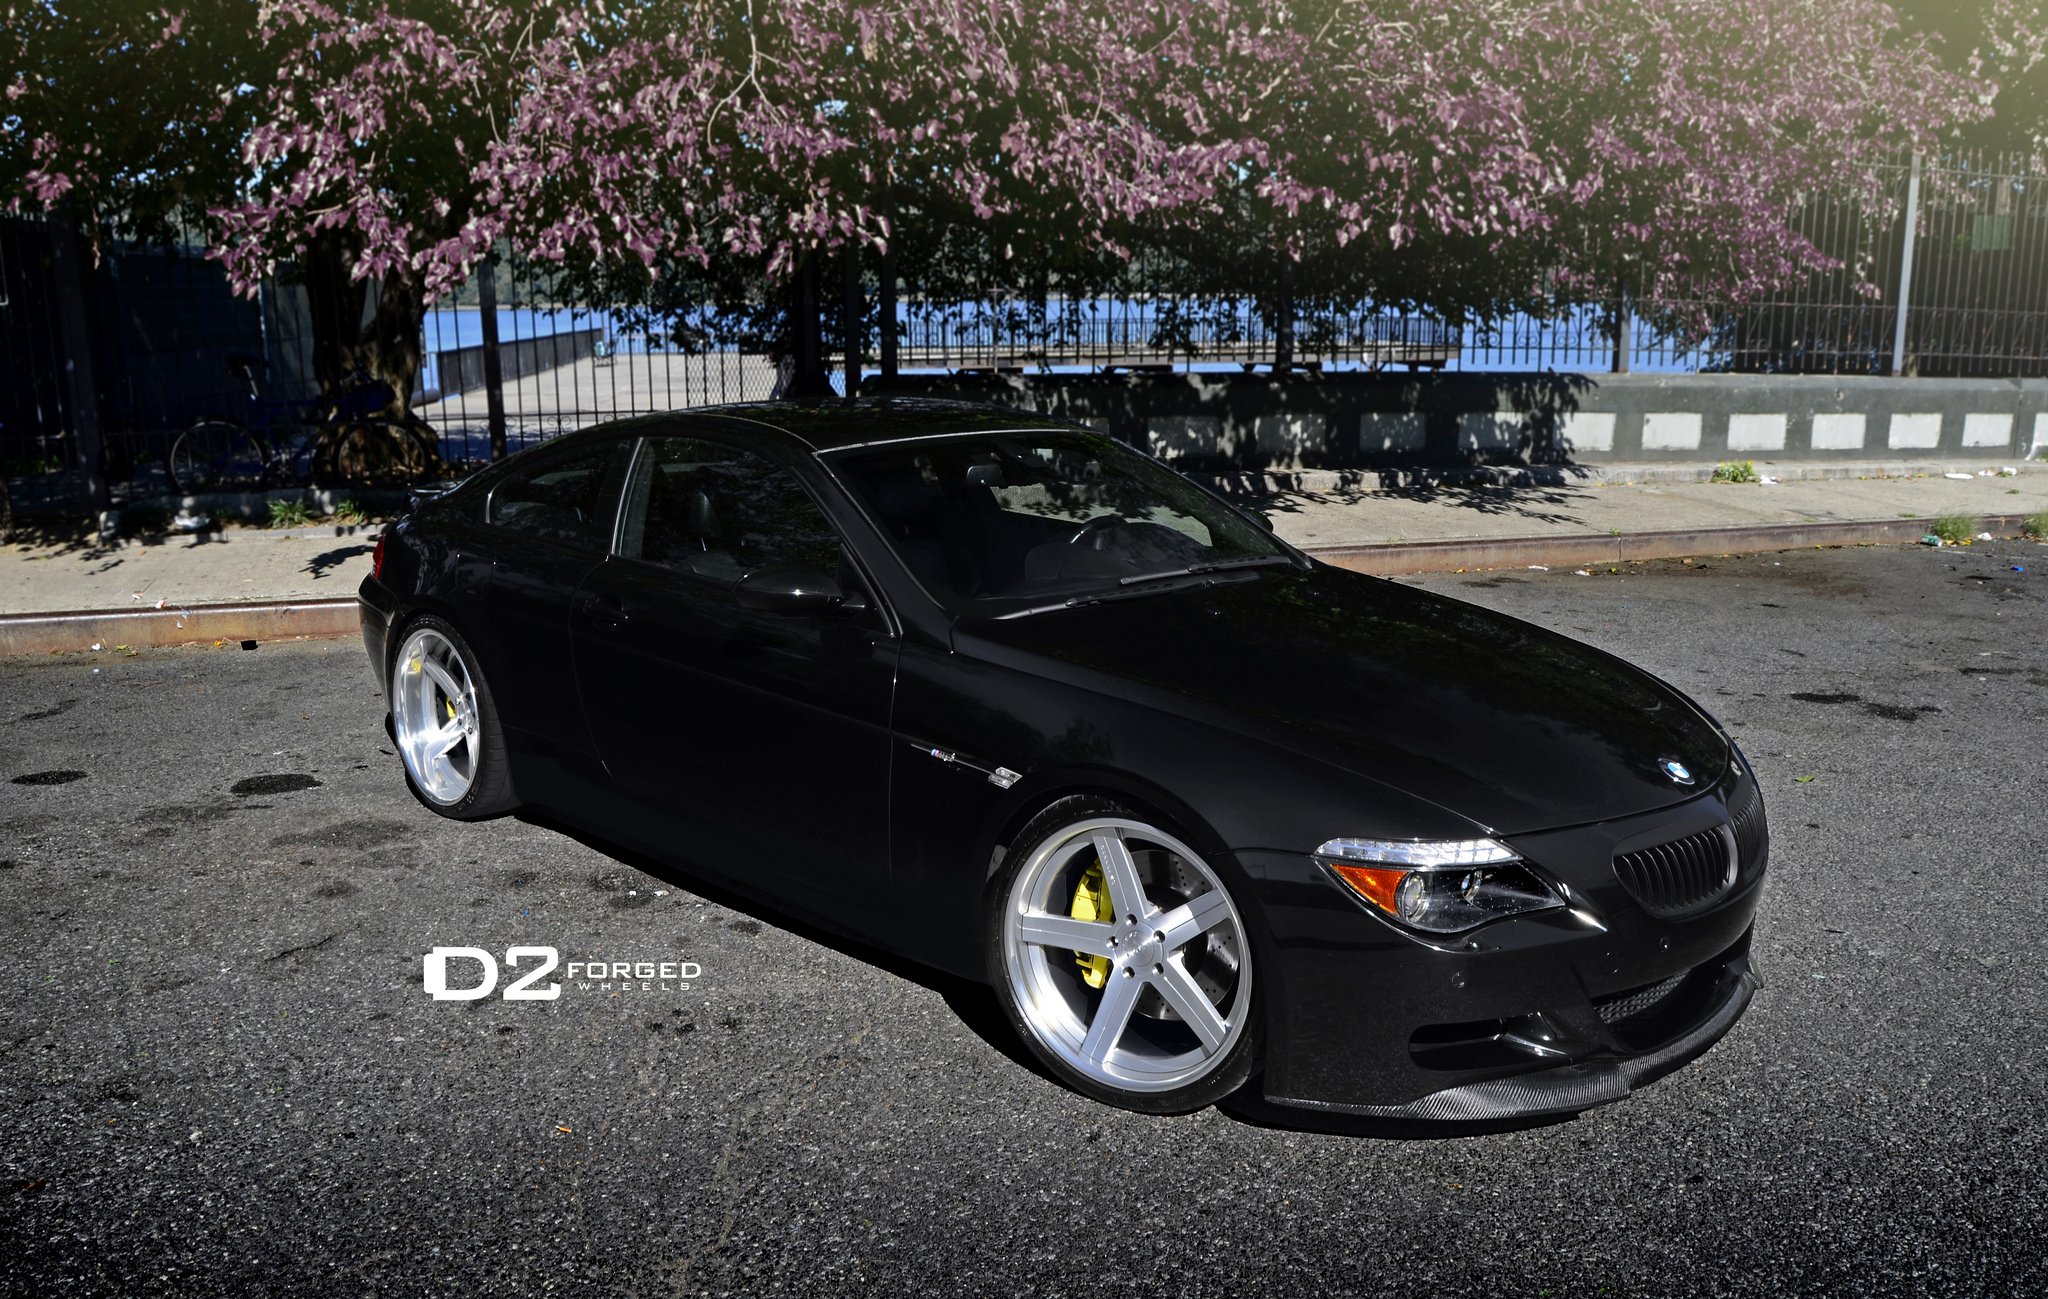 d2forged, Wheels, Tuning, Cars, Bmw, M, 6, Coupe Wallpaper